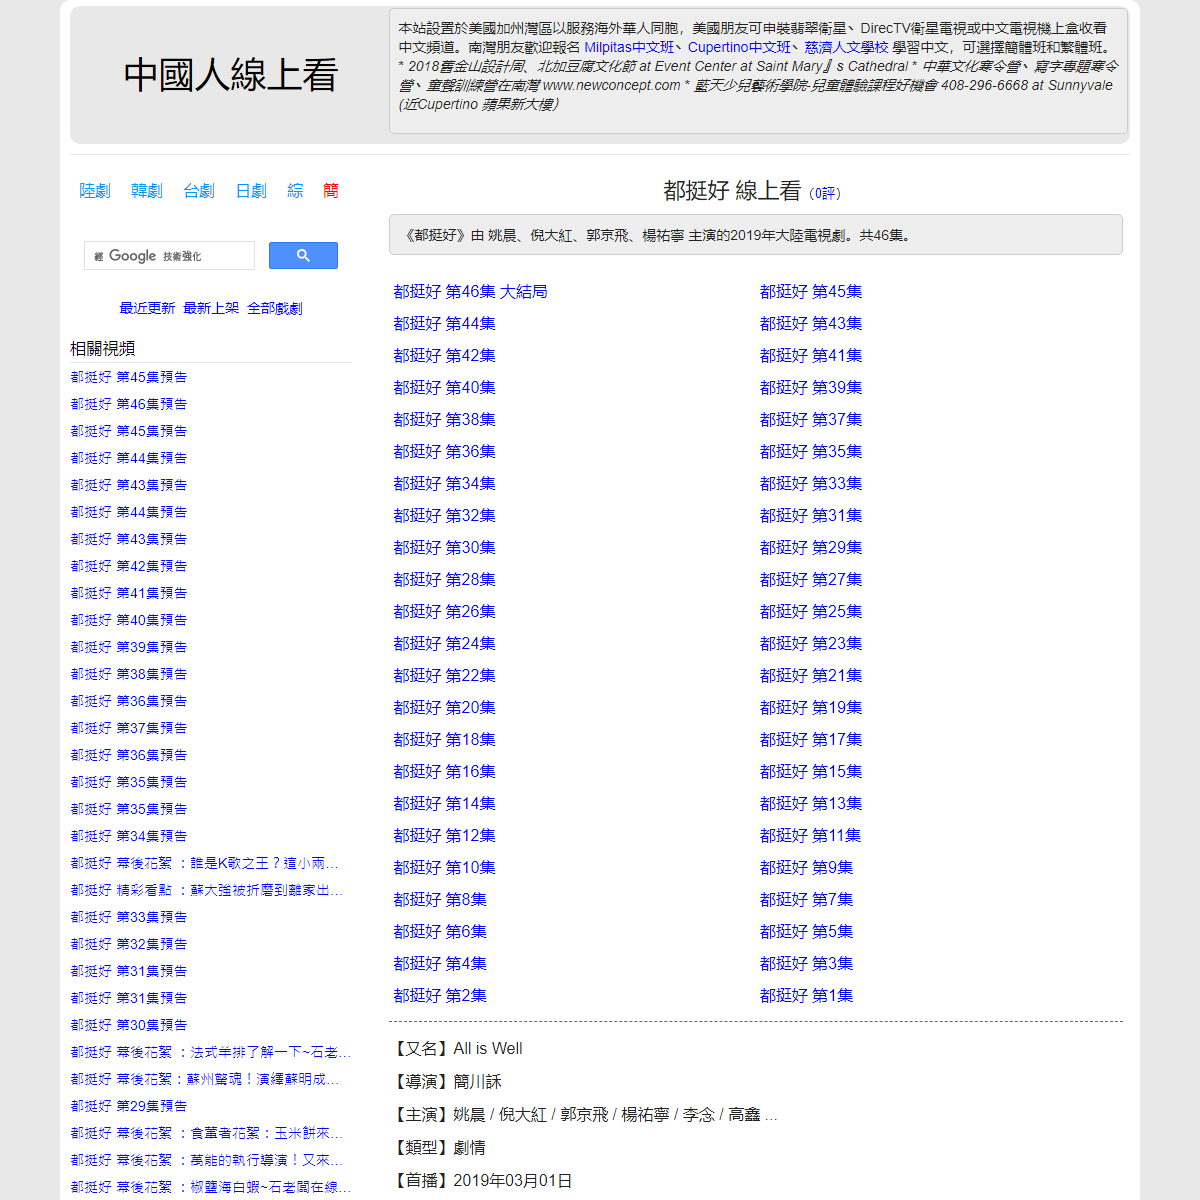 A complete backup of https://chinaq.tv/cn190301/